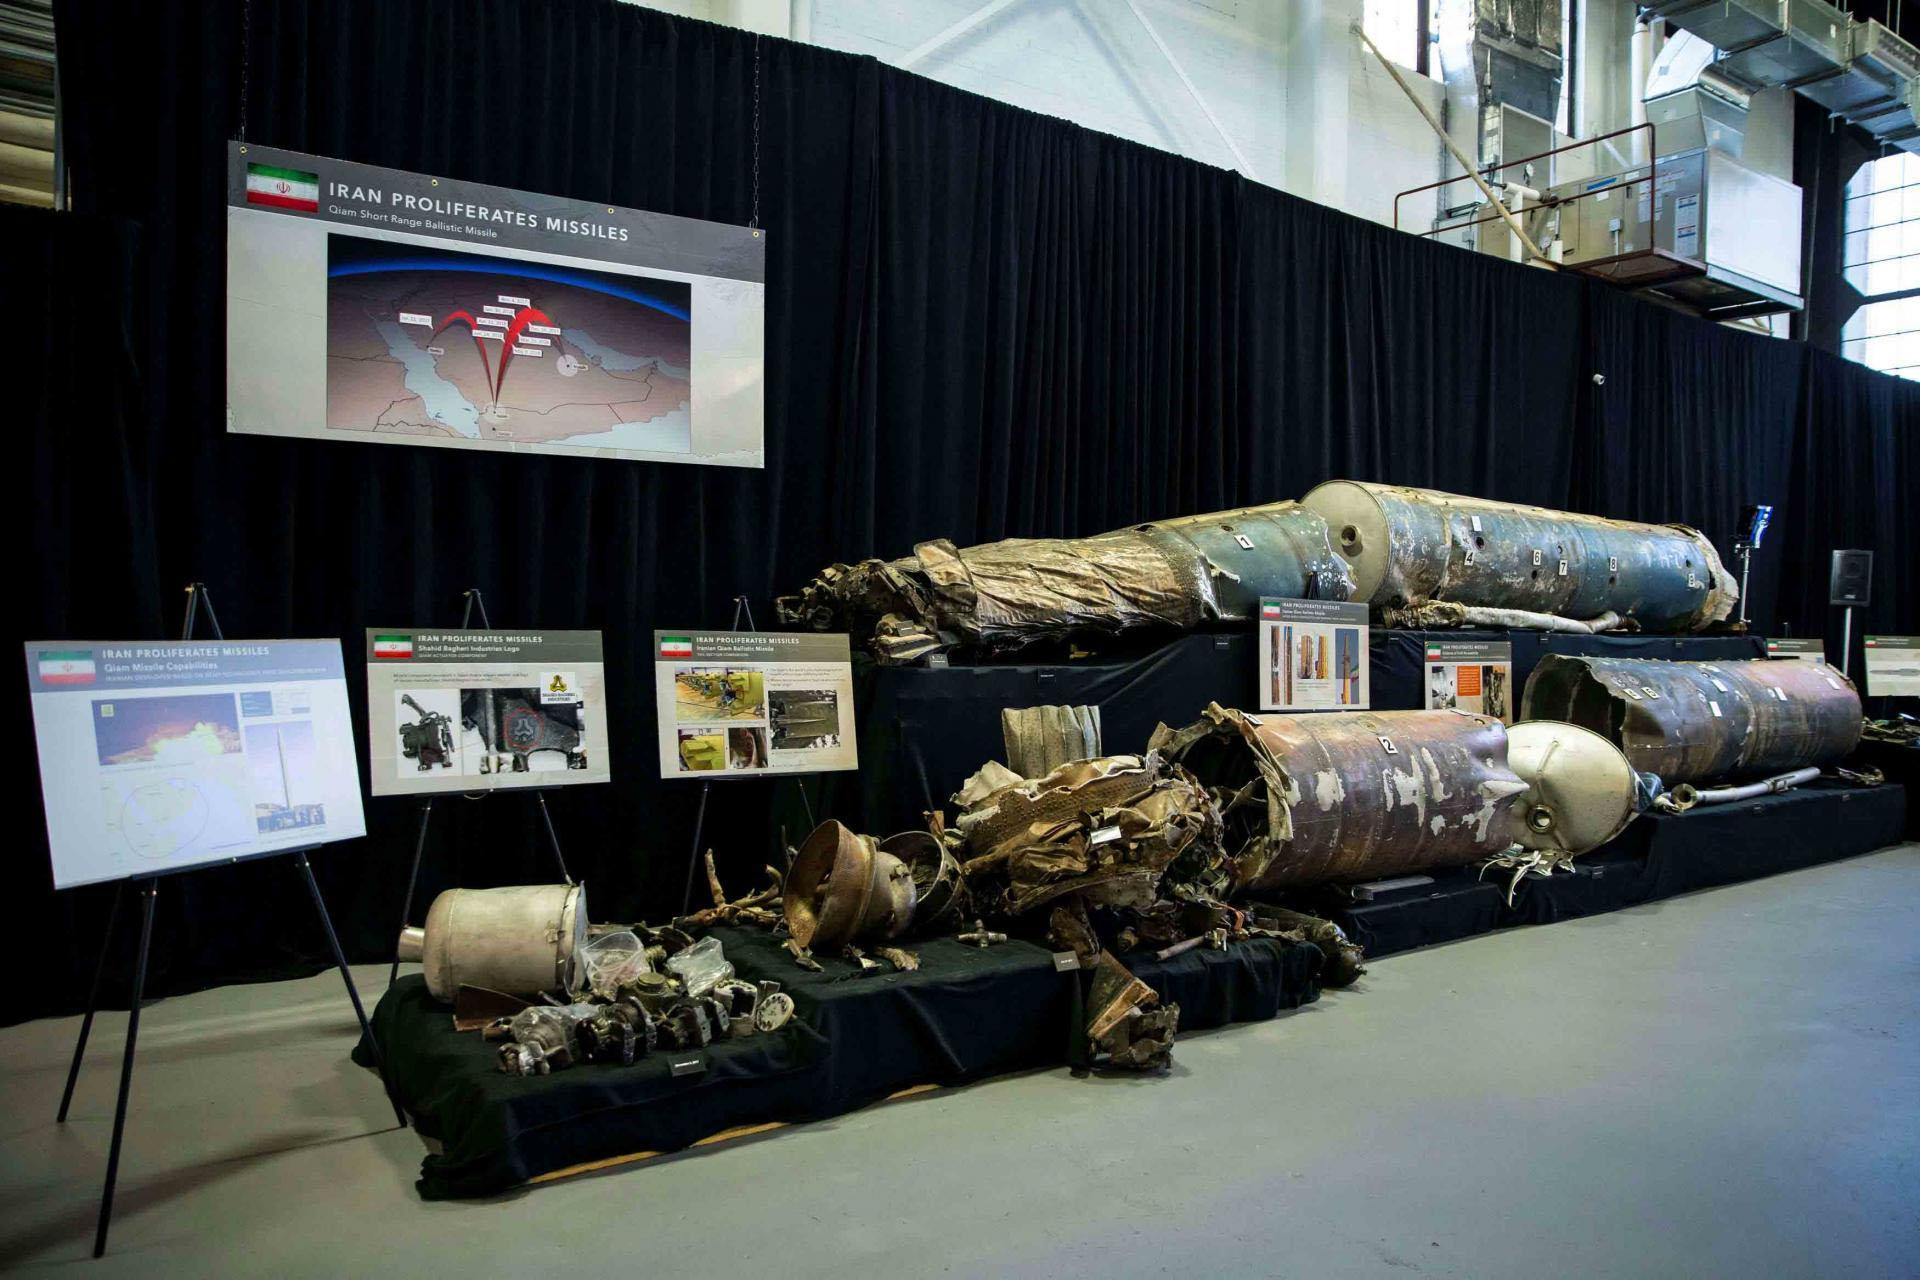 The weapons had characteristics of Iranian manufacture